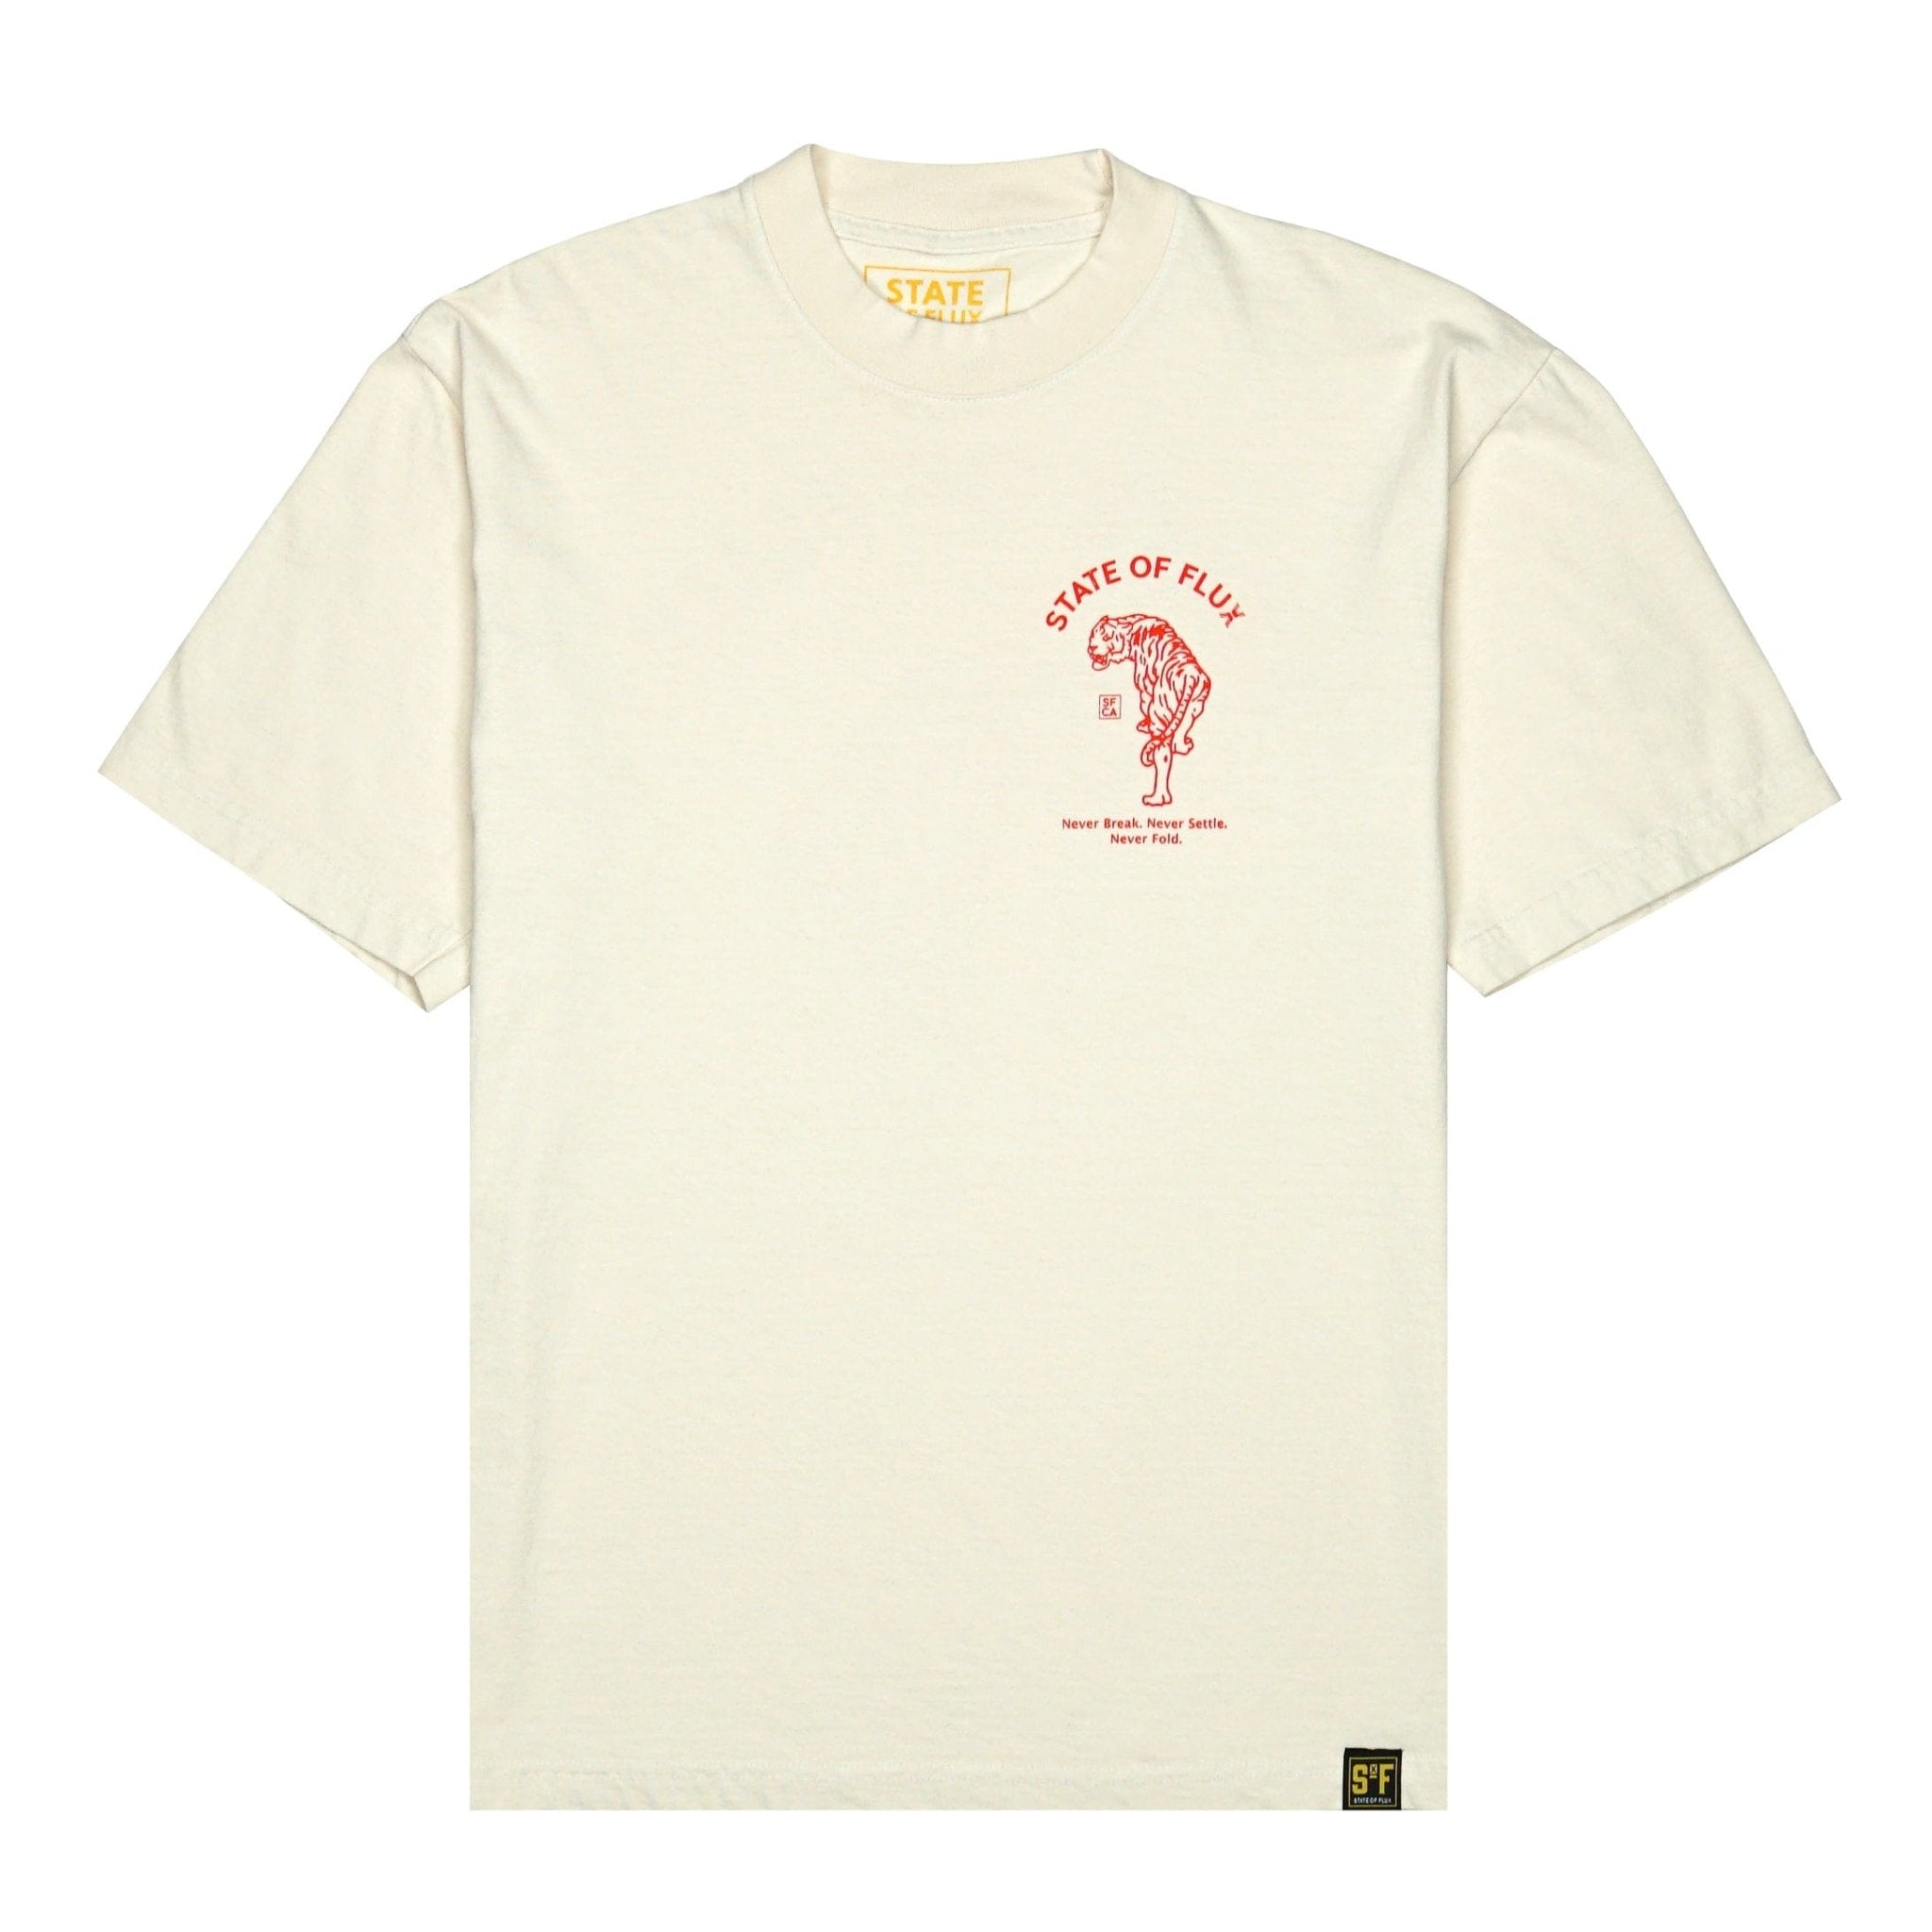 Prowler Tee in cream and red